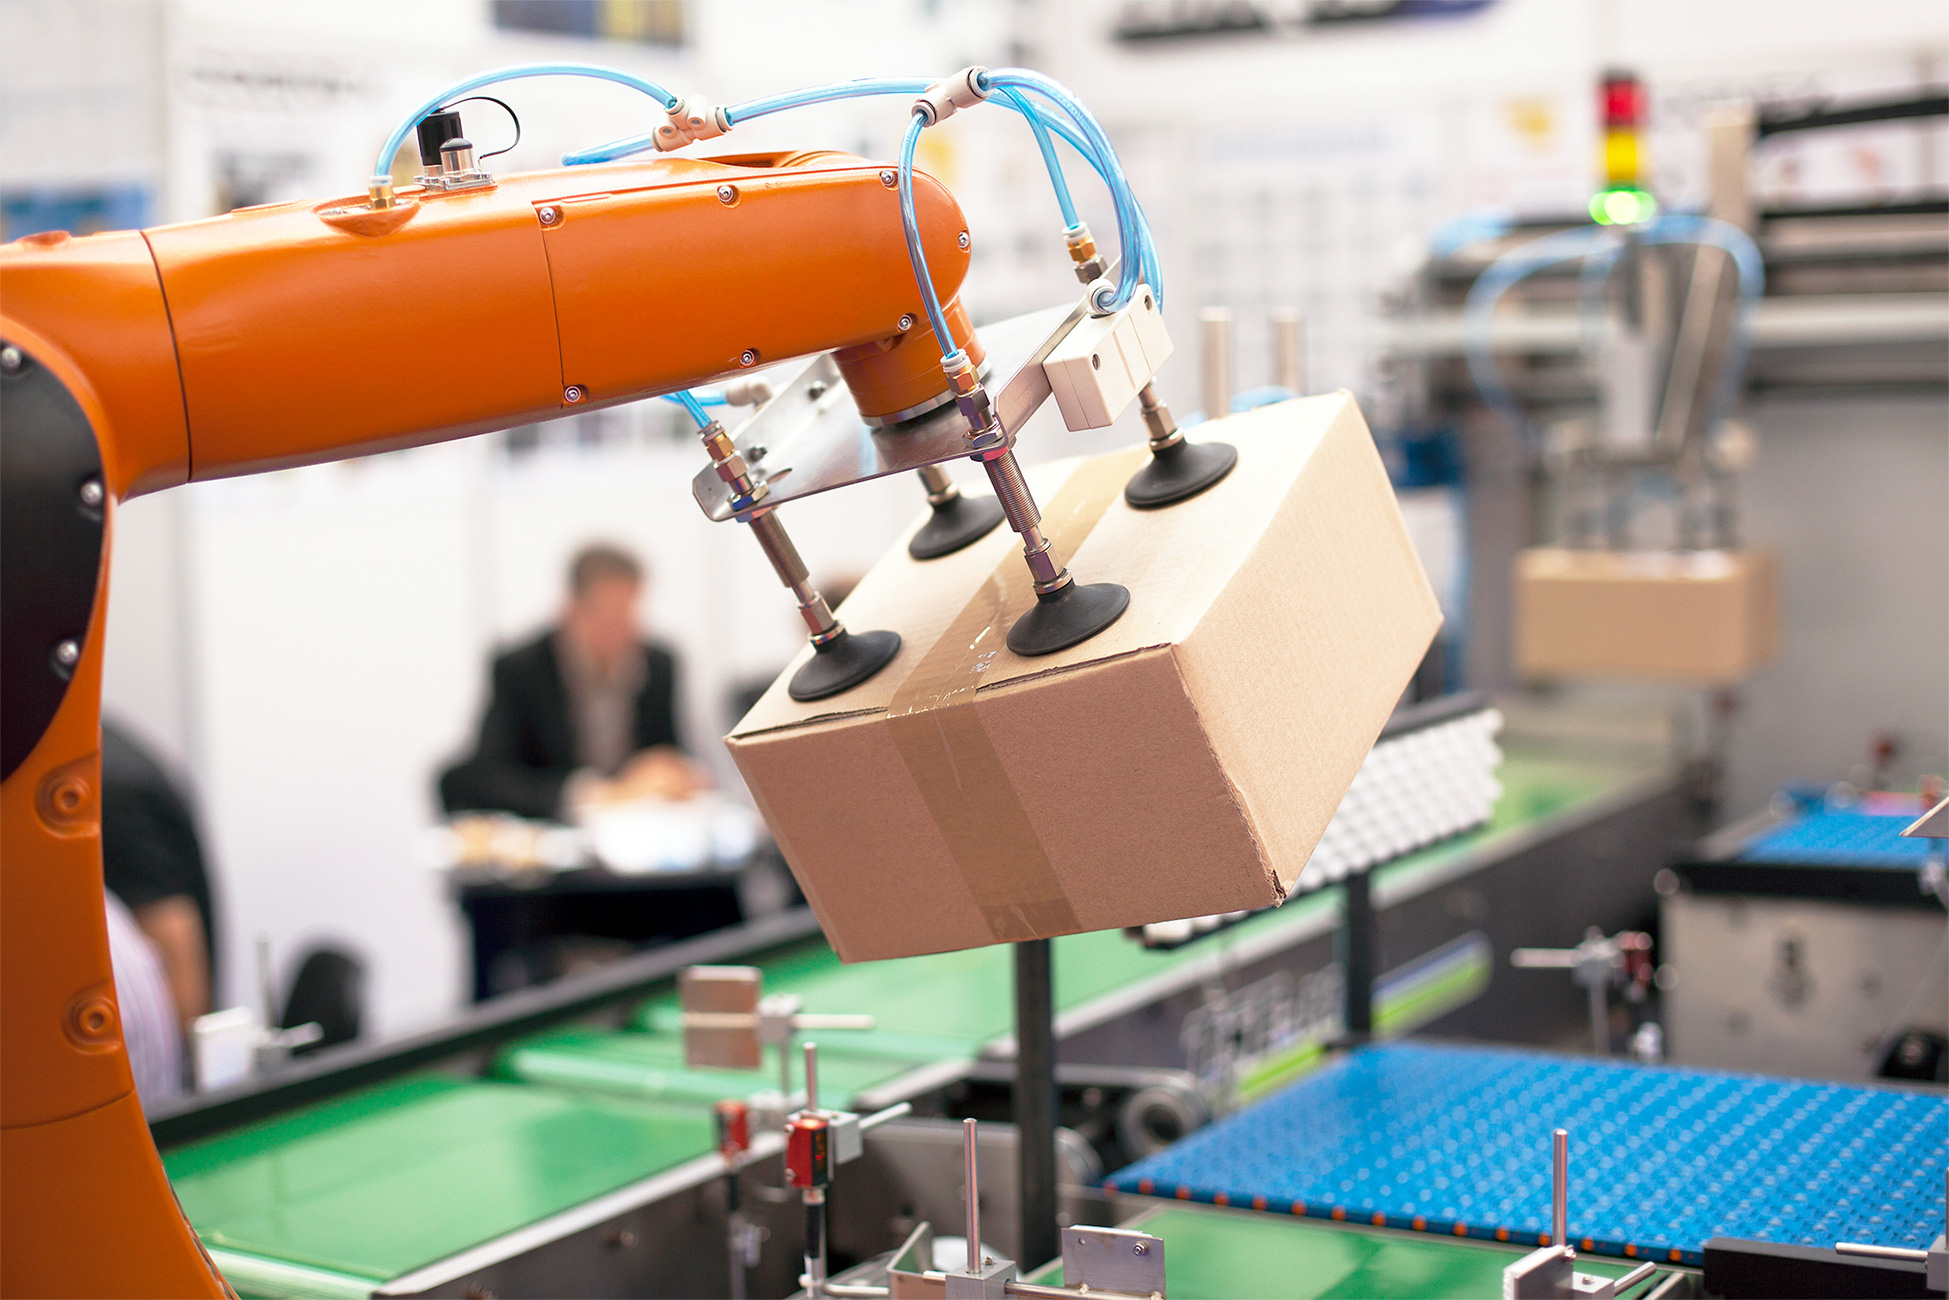 Robotics used to move packages in warehouse automation